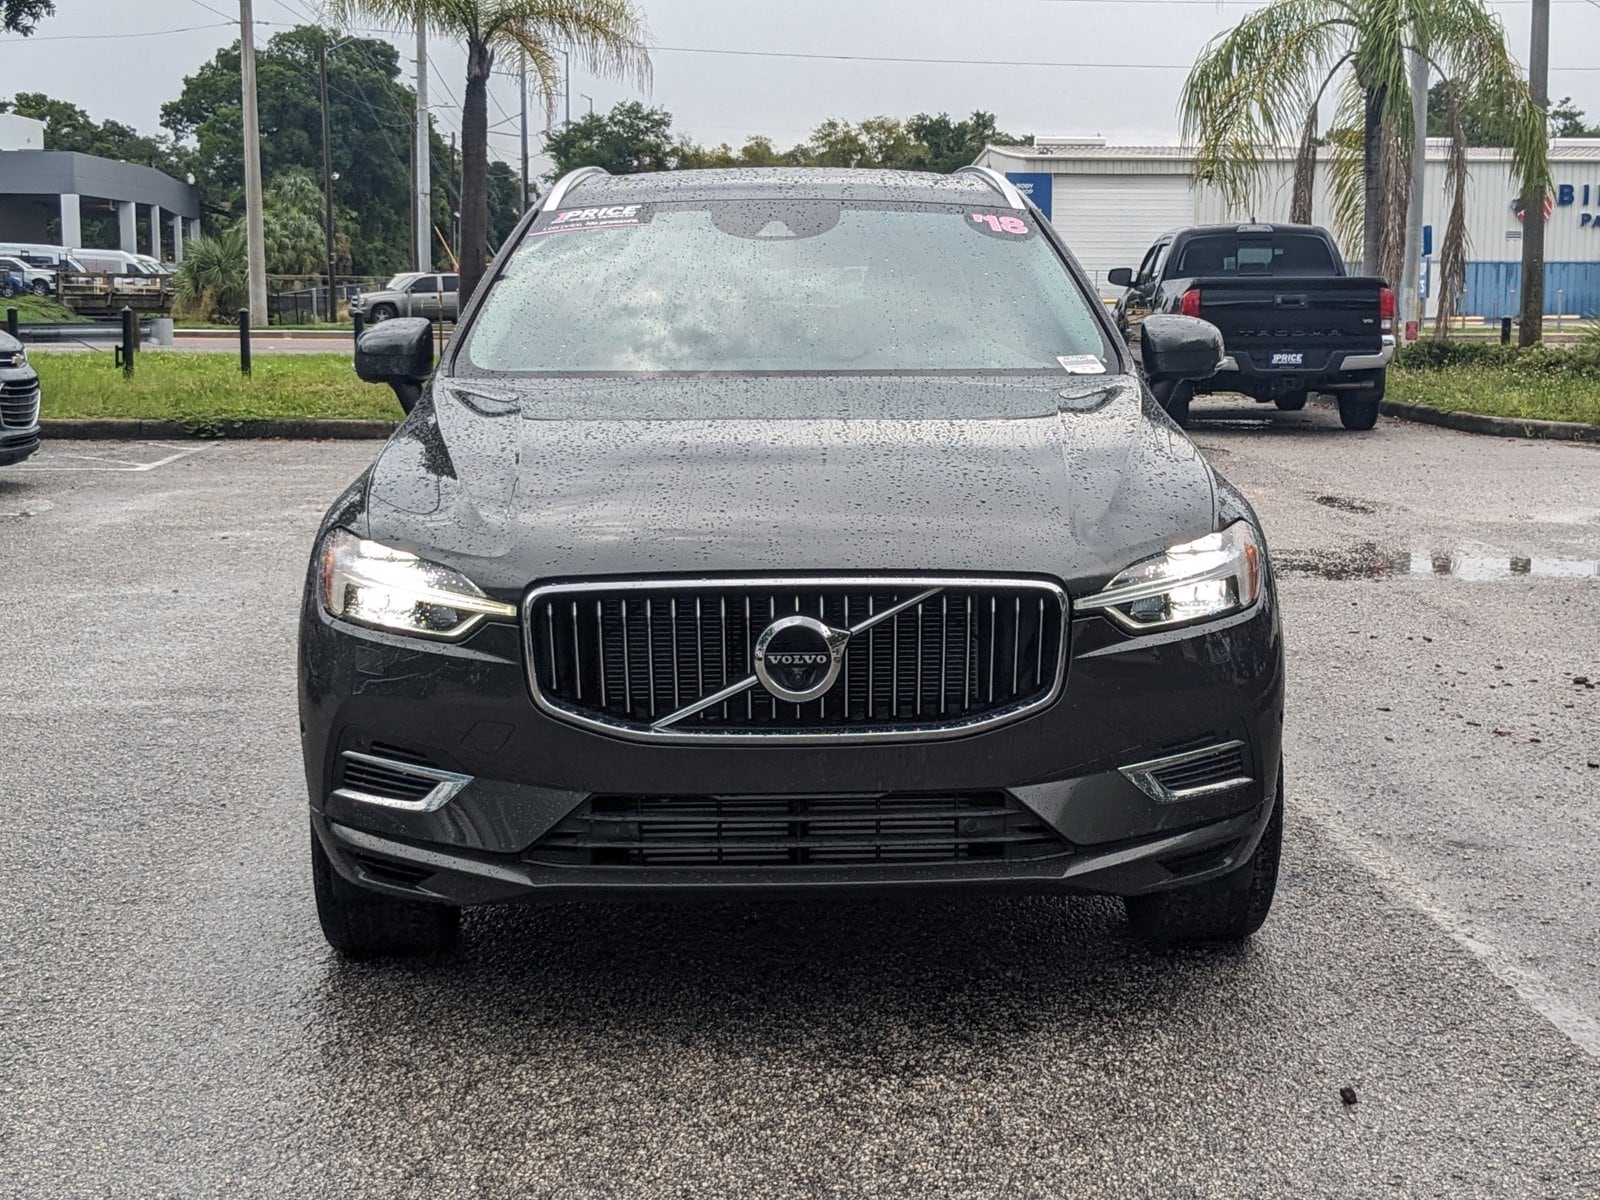 Used 2018 Volvo XC60 Inscription with VIN LYVBR0DL5JB073940 for sale in Hardeeville, SC